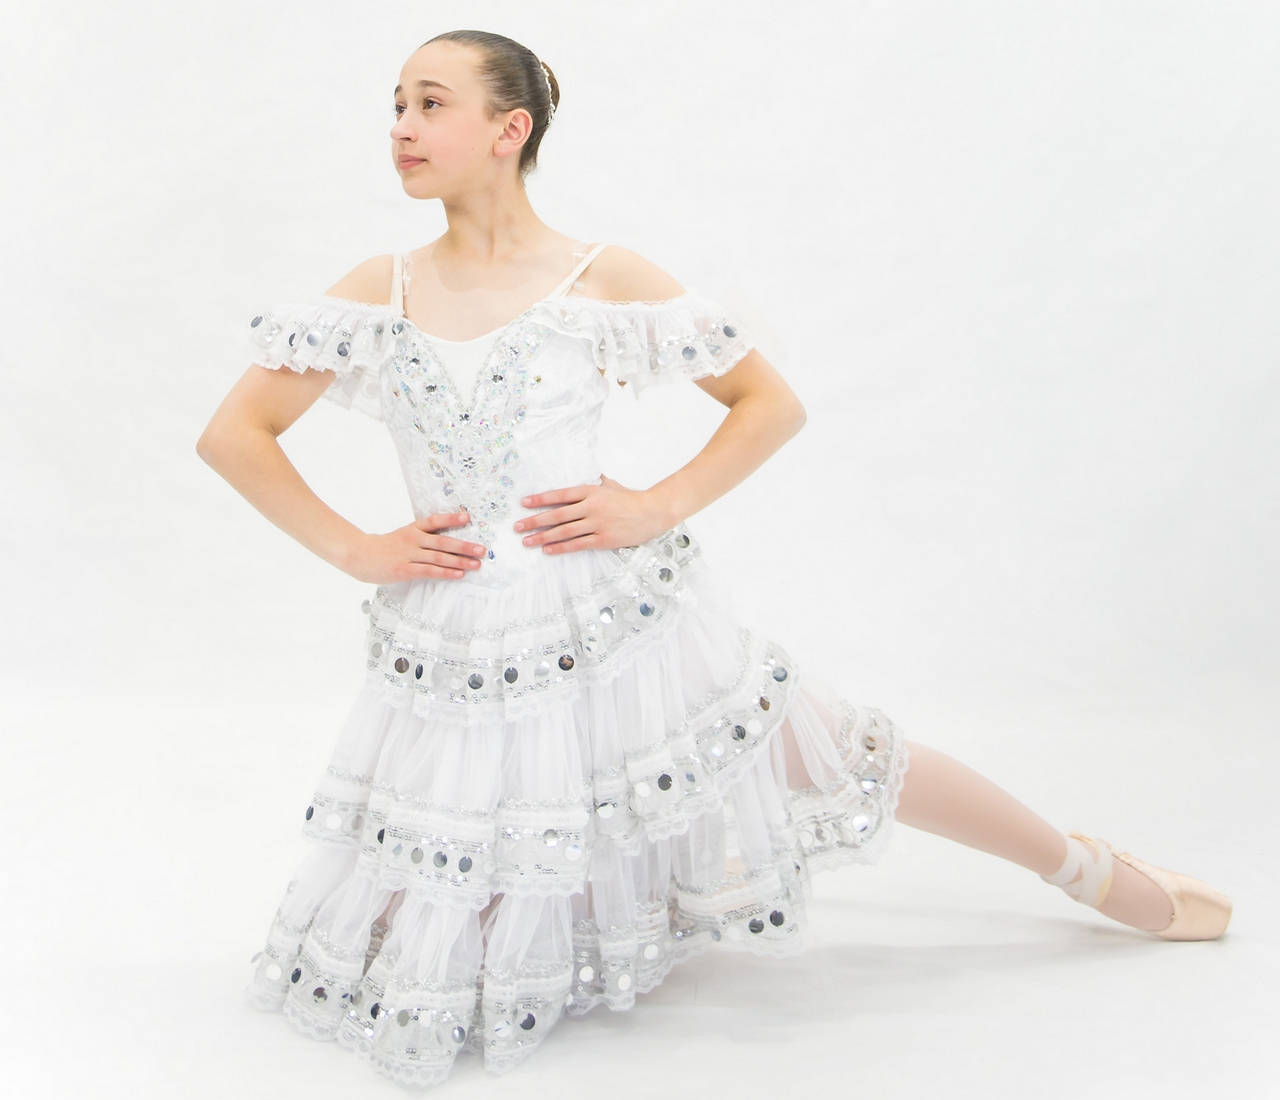 Why take dance classes in Albuquerque NMwith SiSu Dance Academy?